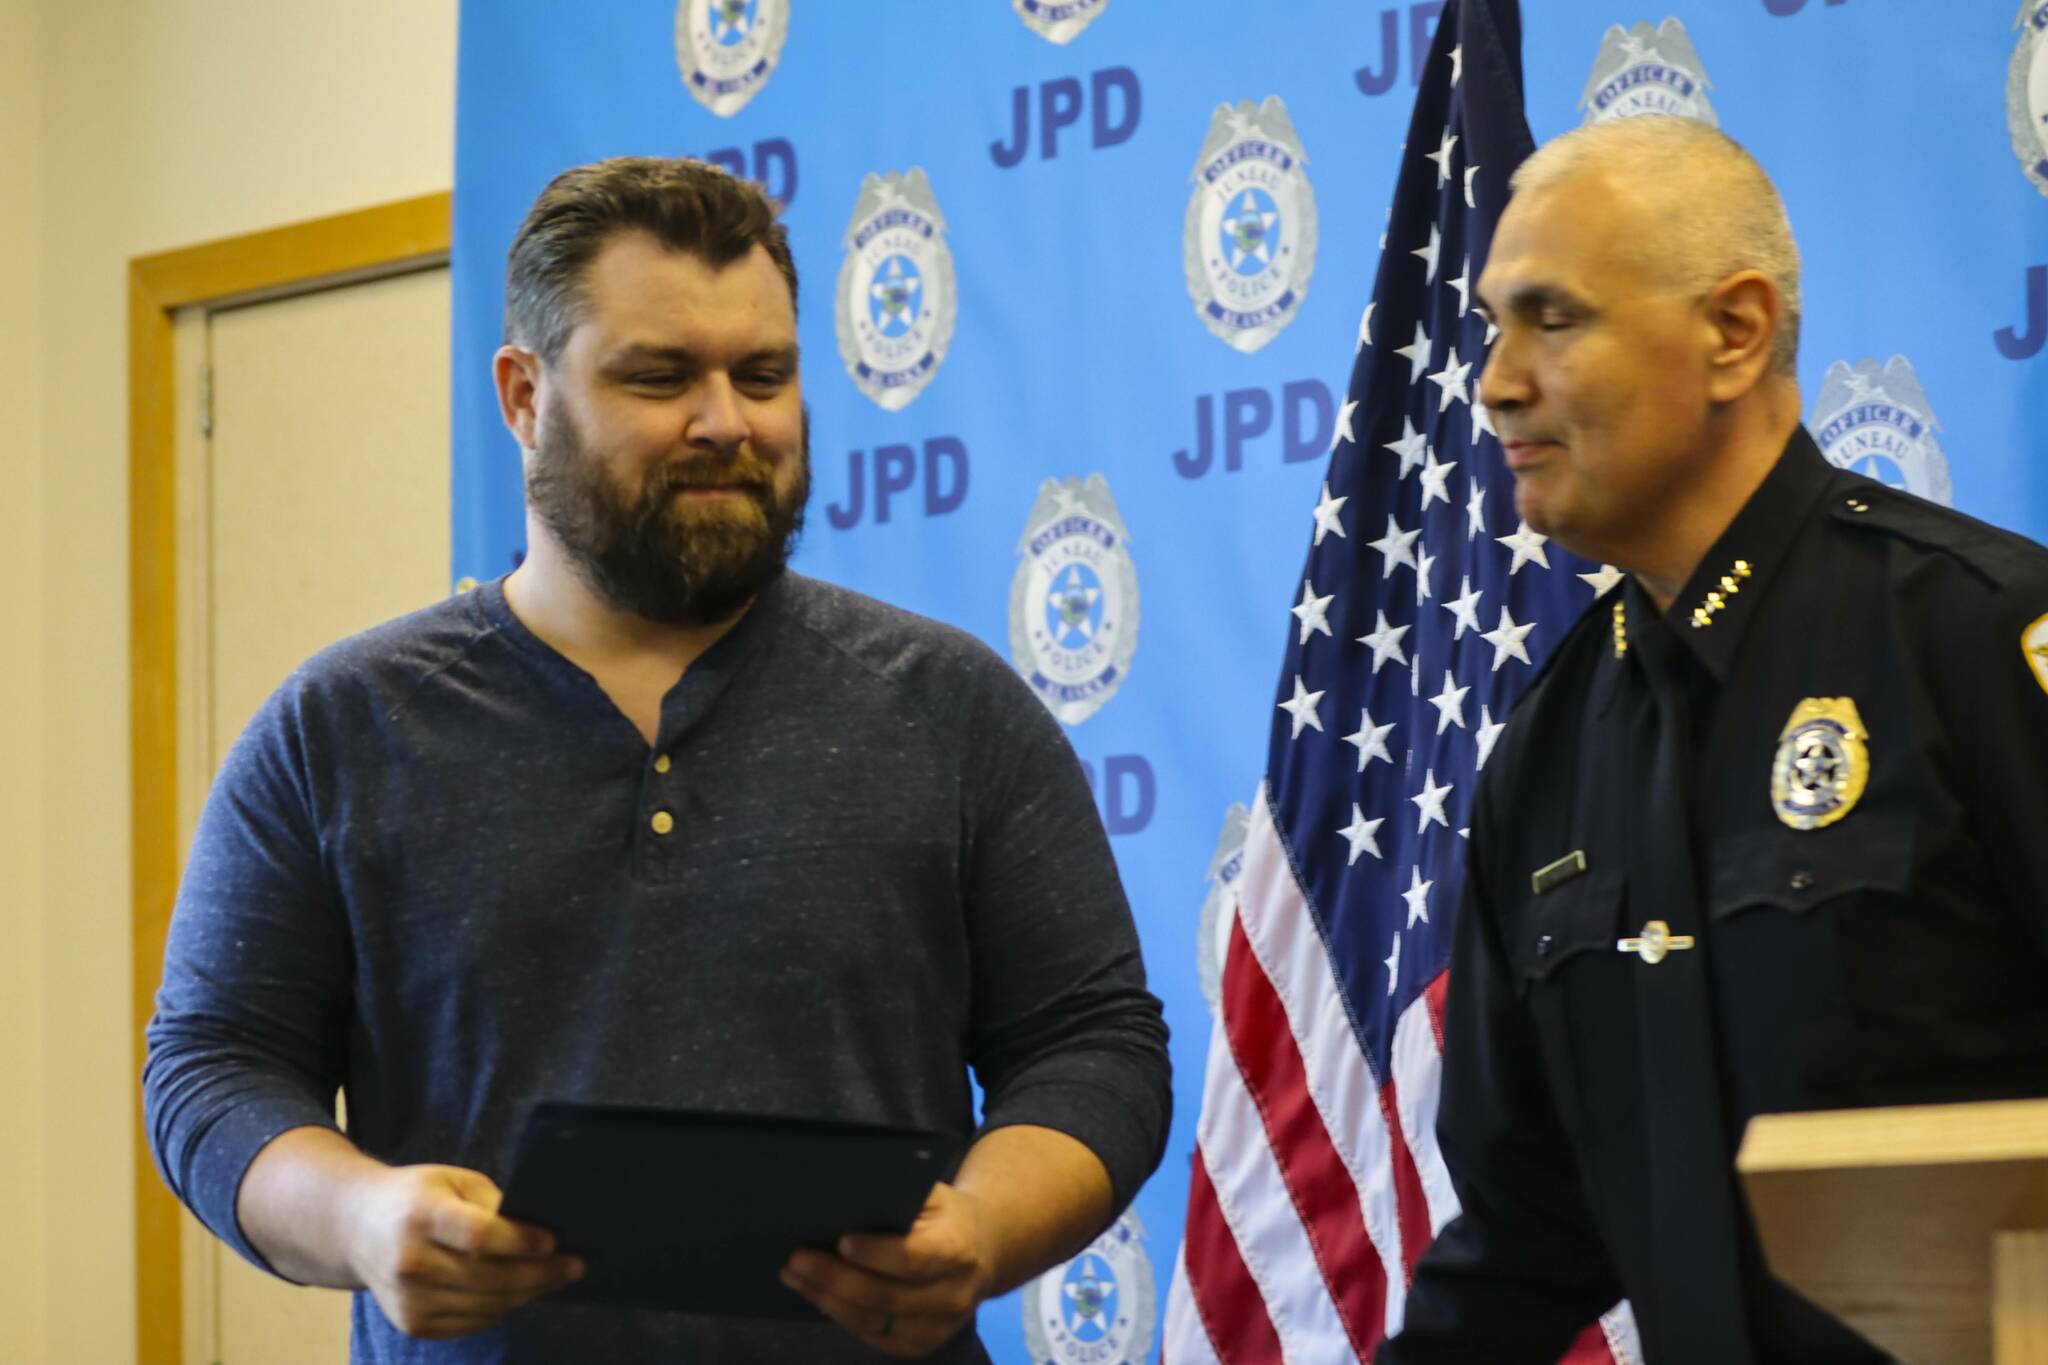 Chief Ed Mercer presents Robert Partin an award for bravery during the Juneau Police Department’s annual award ceremony on June 9, 2022. (Michael S. Lockett / Juneau Empire)